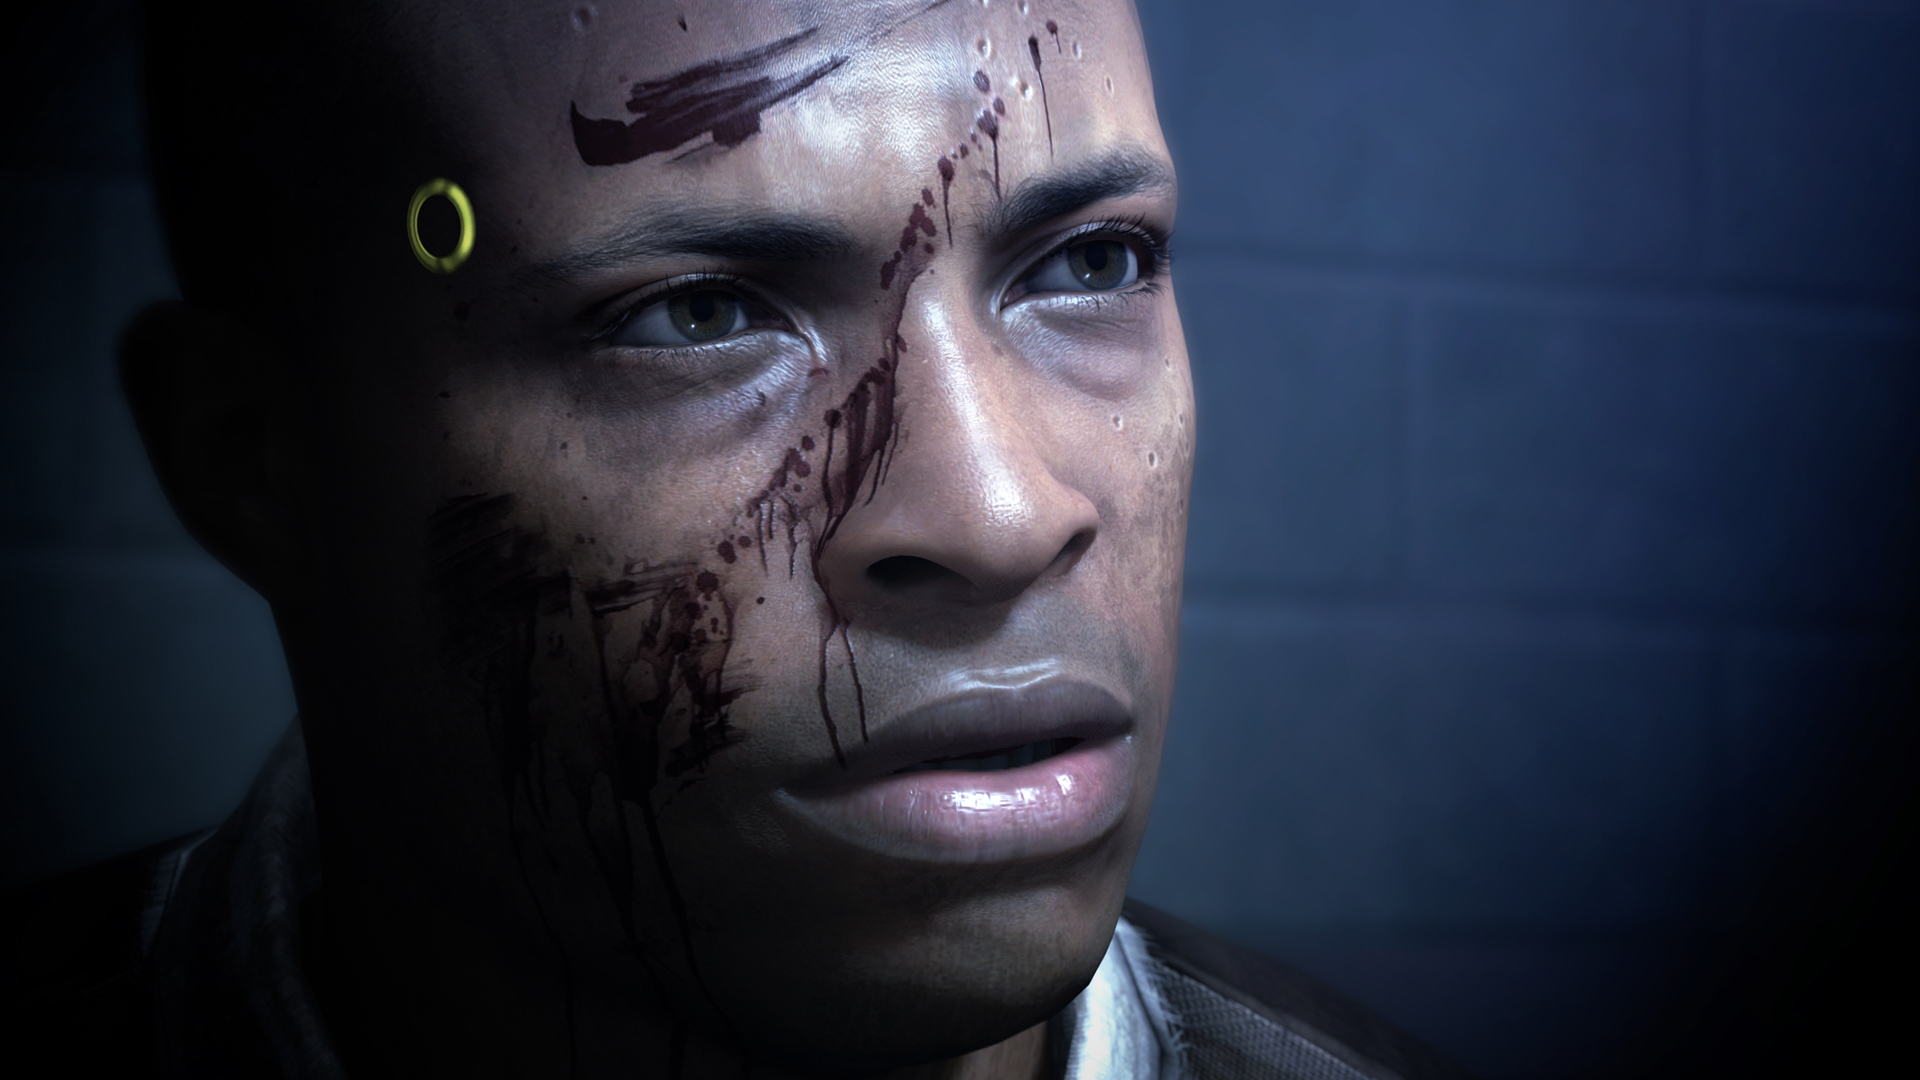 Detroit: Become Human' for PS4 is getting great reviews